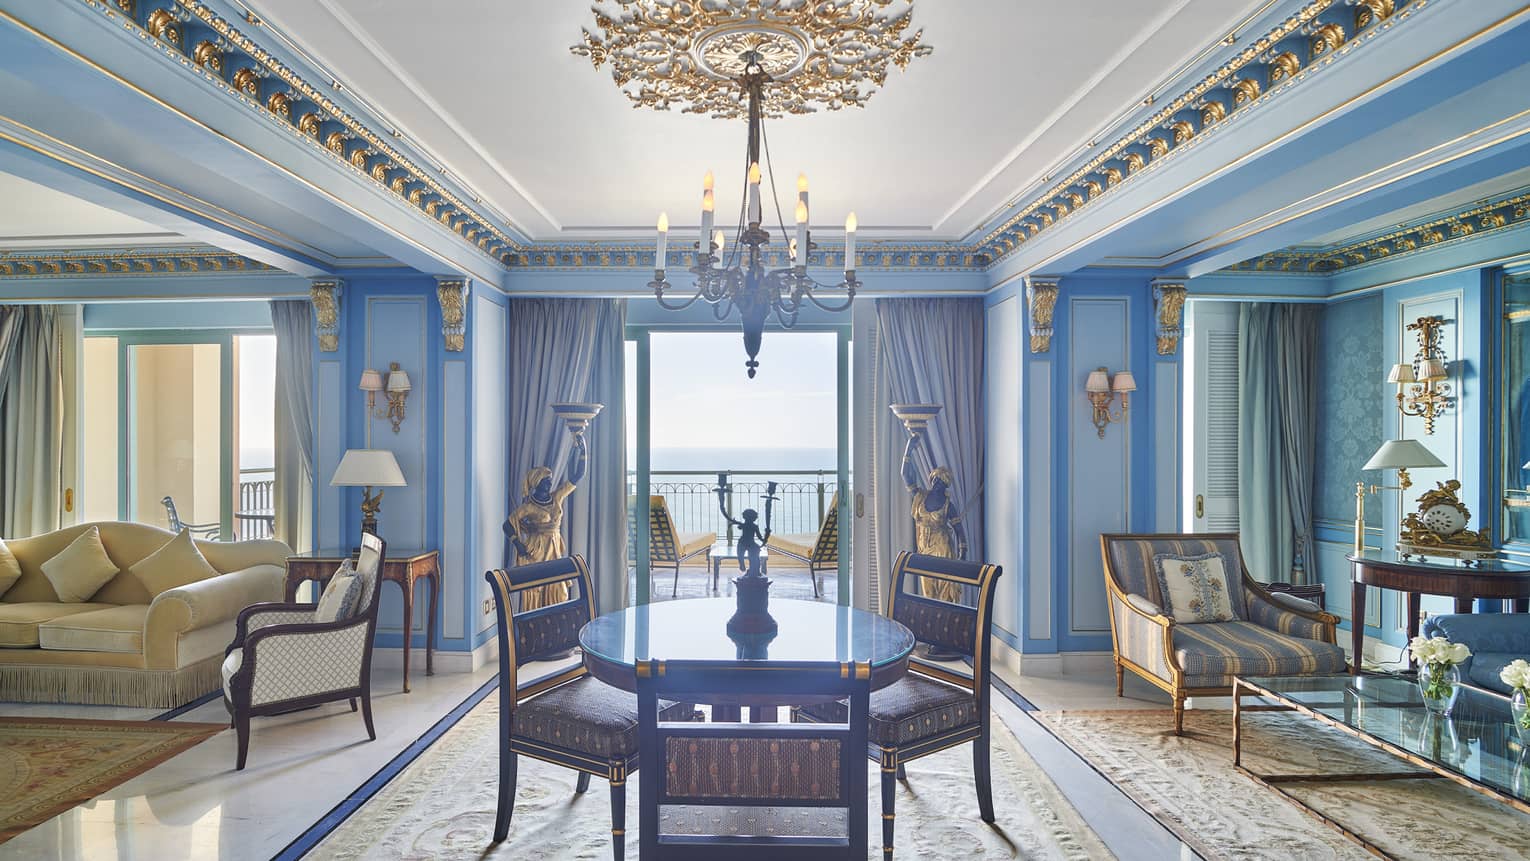 Presidential Suite dining/living area with round dining table, chaise longue, cream couch, blue wall accents, doorway to veranda with sea views